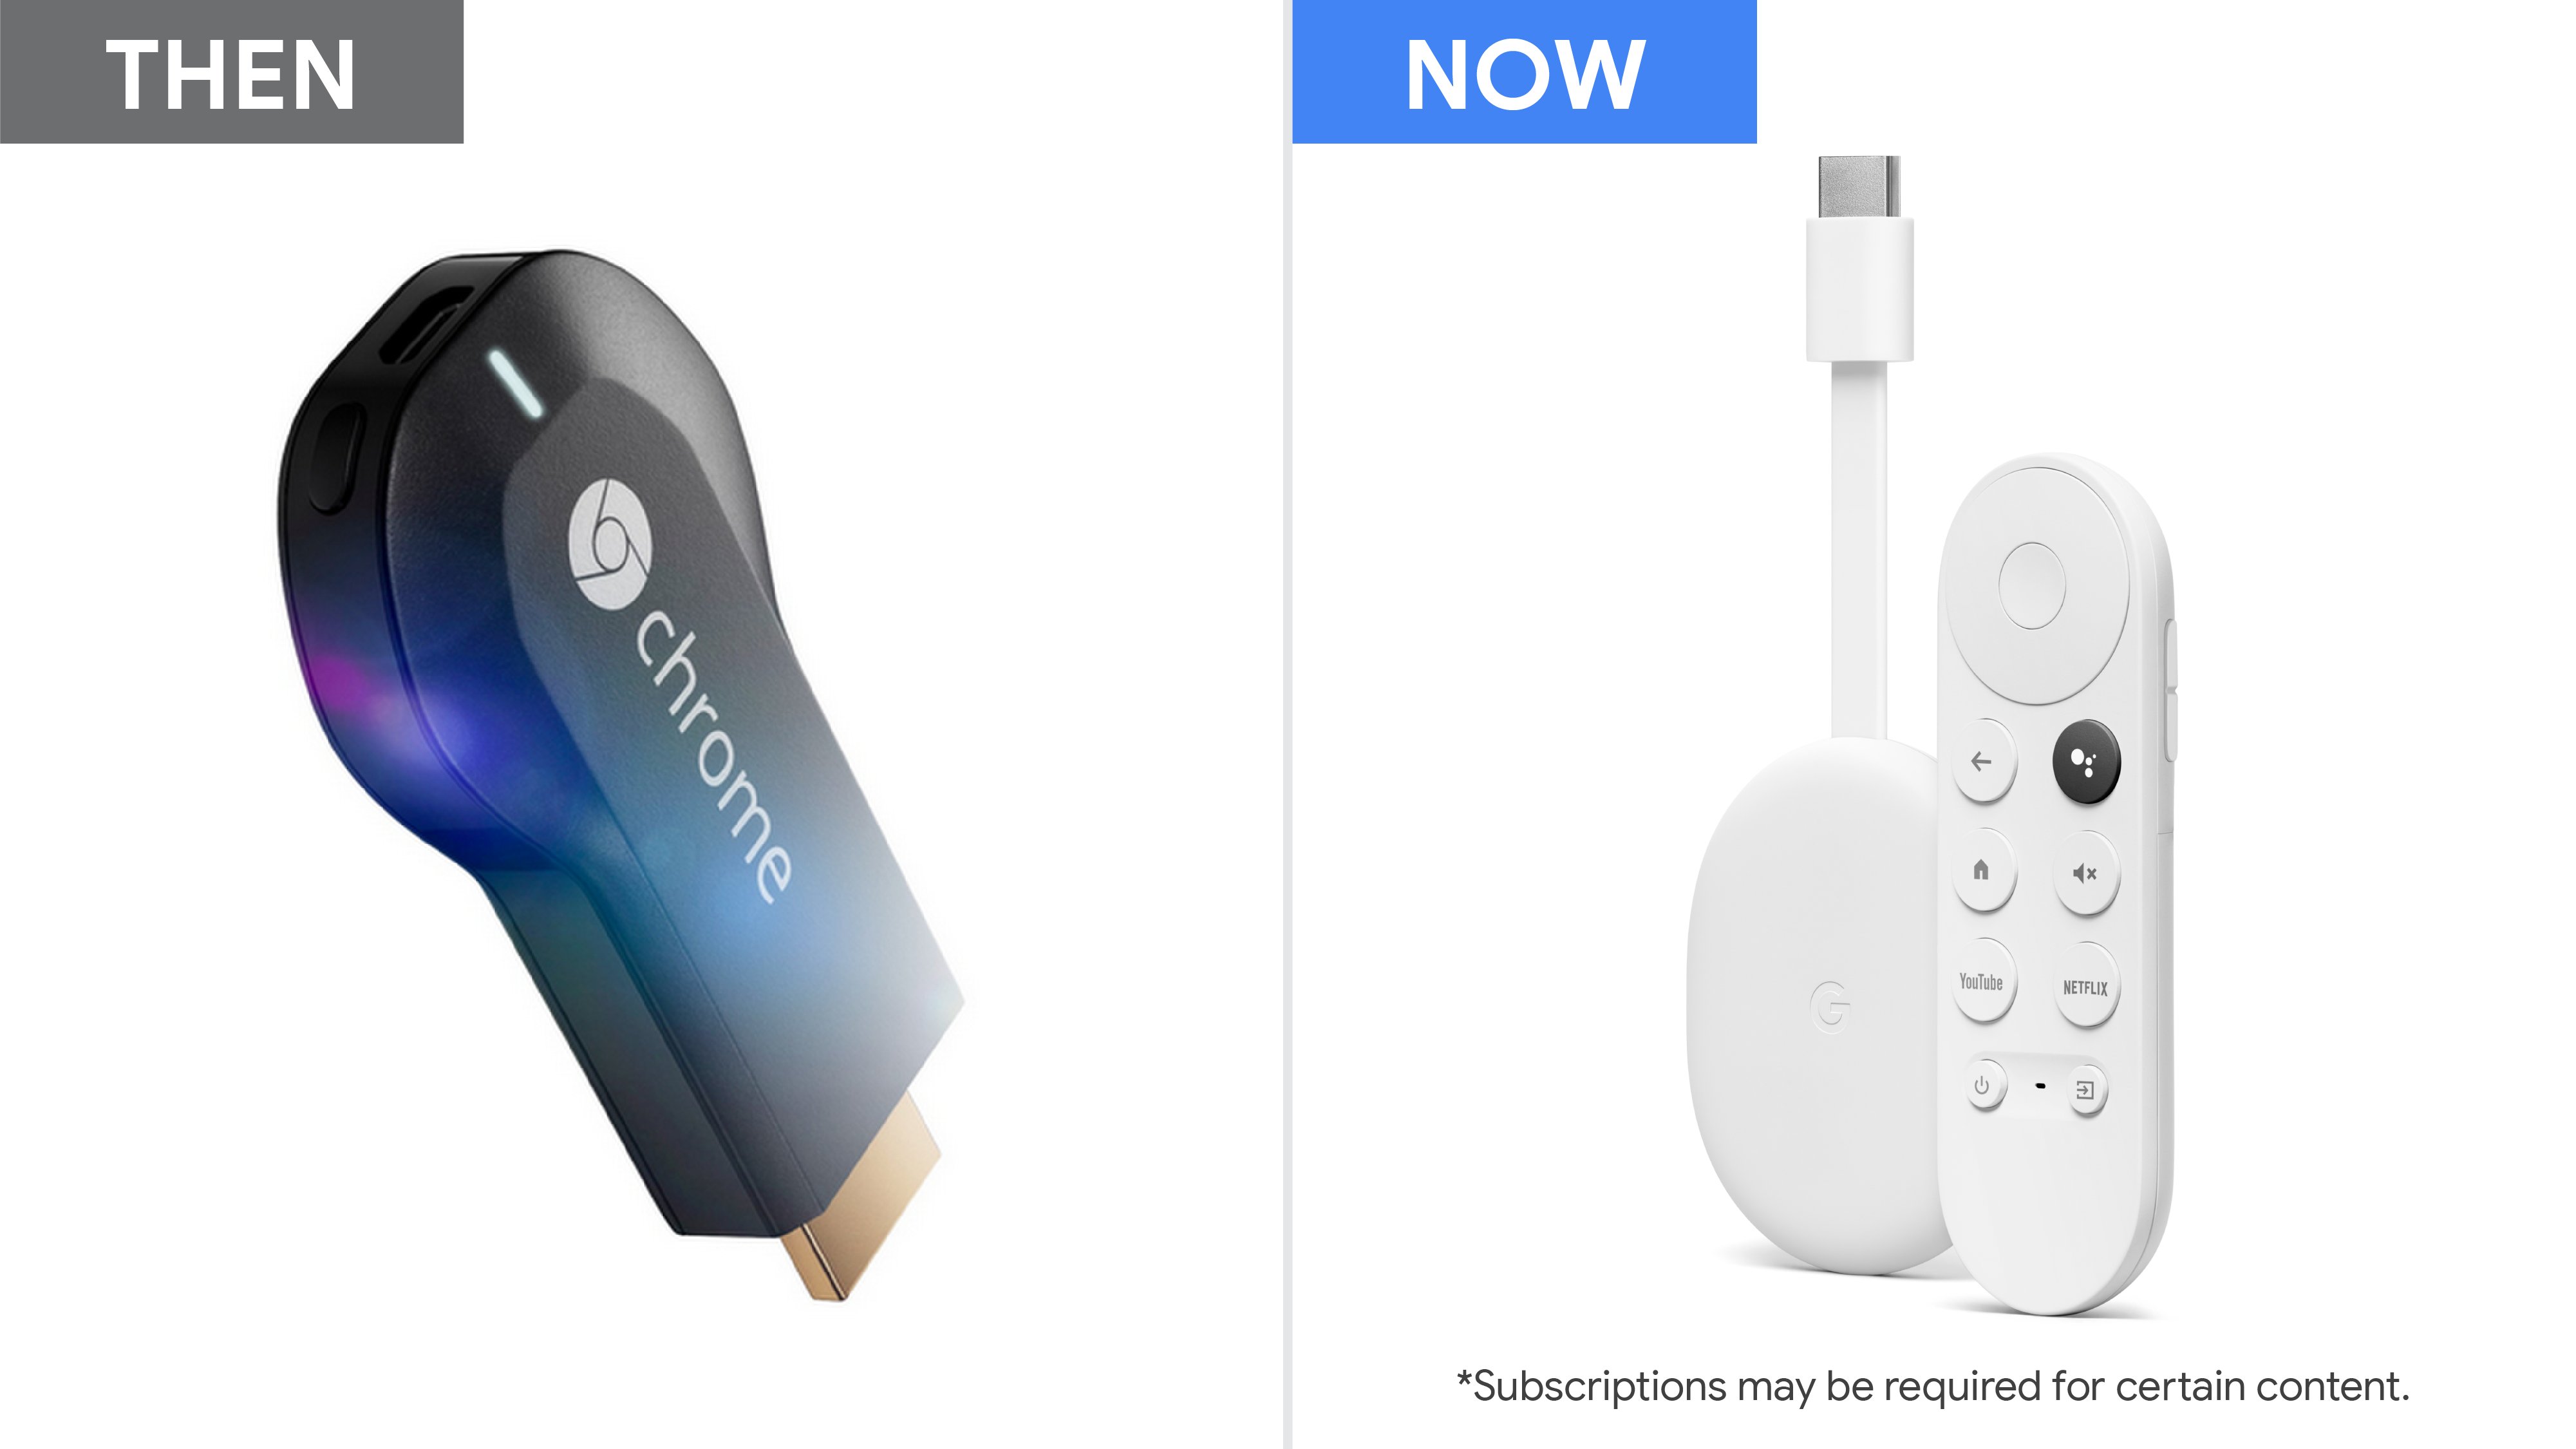 Made by Google on Twitter: "*A 1st gen Chromecast travels through time meets #Chromecast with Google TV* 1st gen: We come with a sidekick in the future? Chromecast with Google TV: